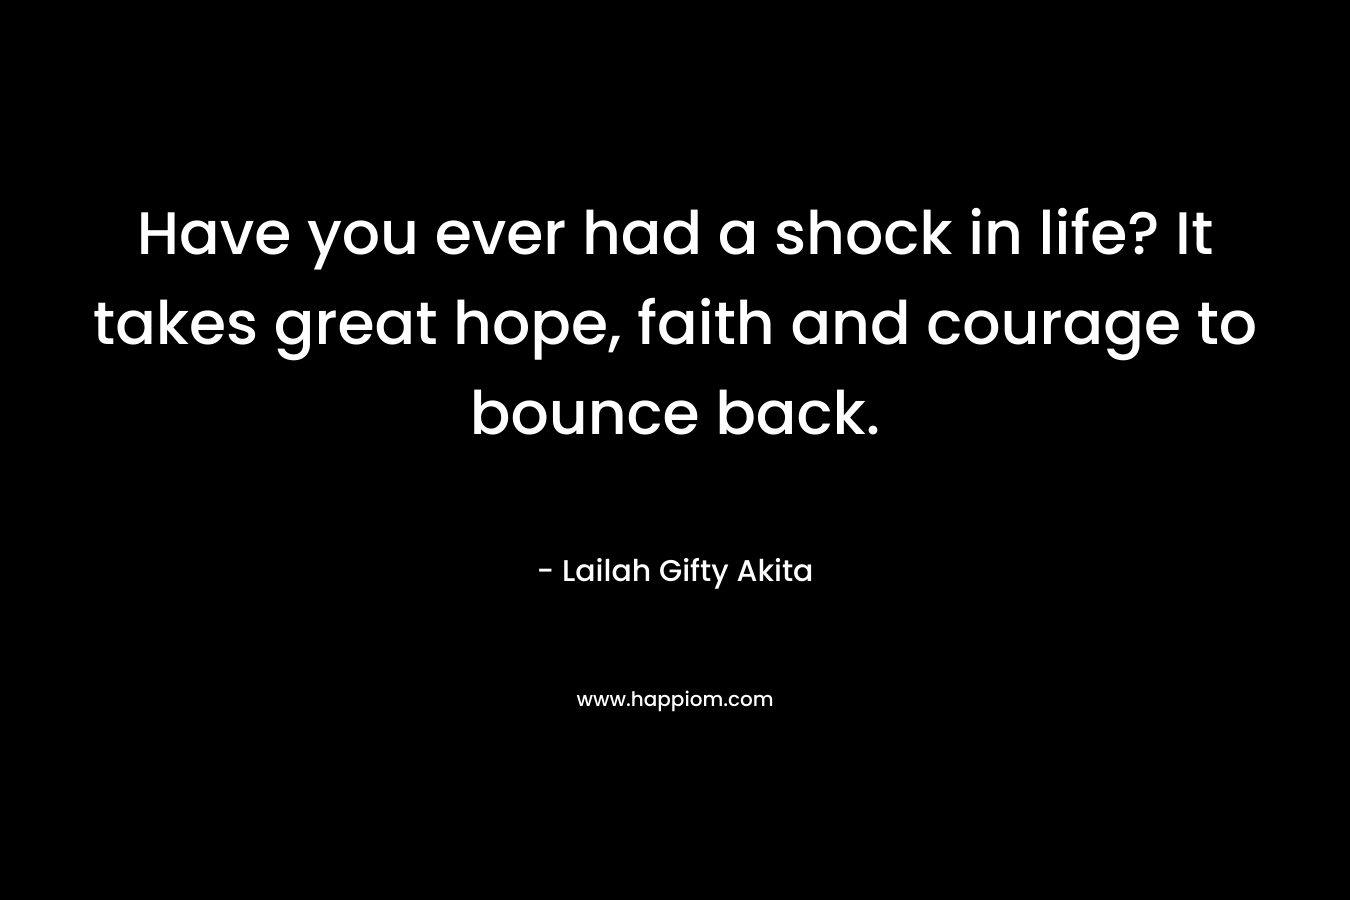 Have you ever had a shock in life? It takes great hope, faith and courage to bounce back. – Lailah Gifty Akita